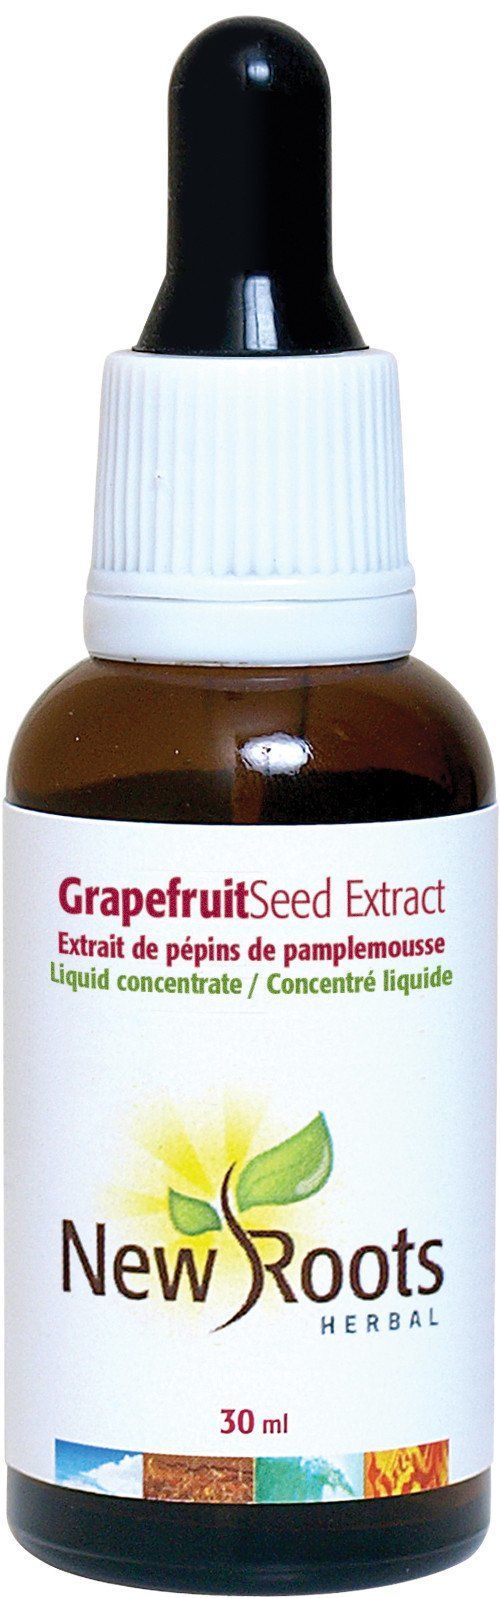 New Roots Herbal - Grapefruit Seed Extract, 30ml